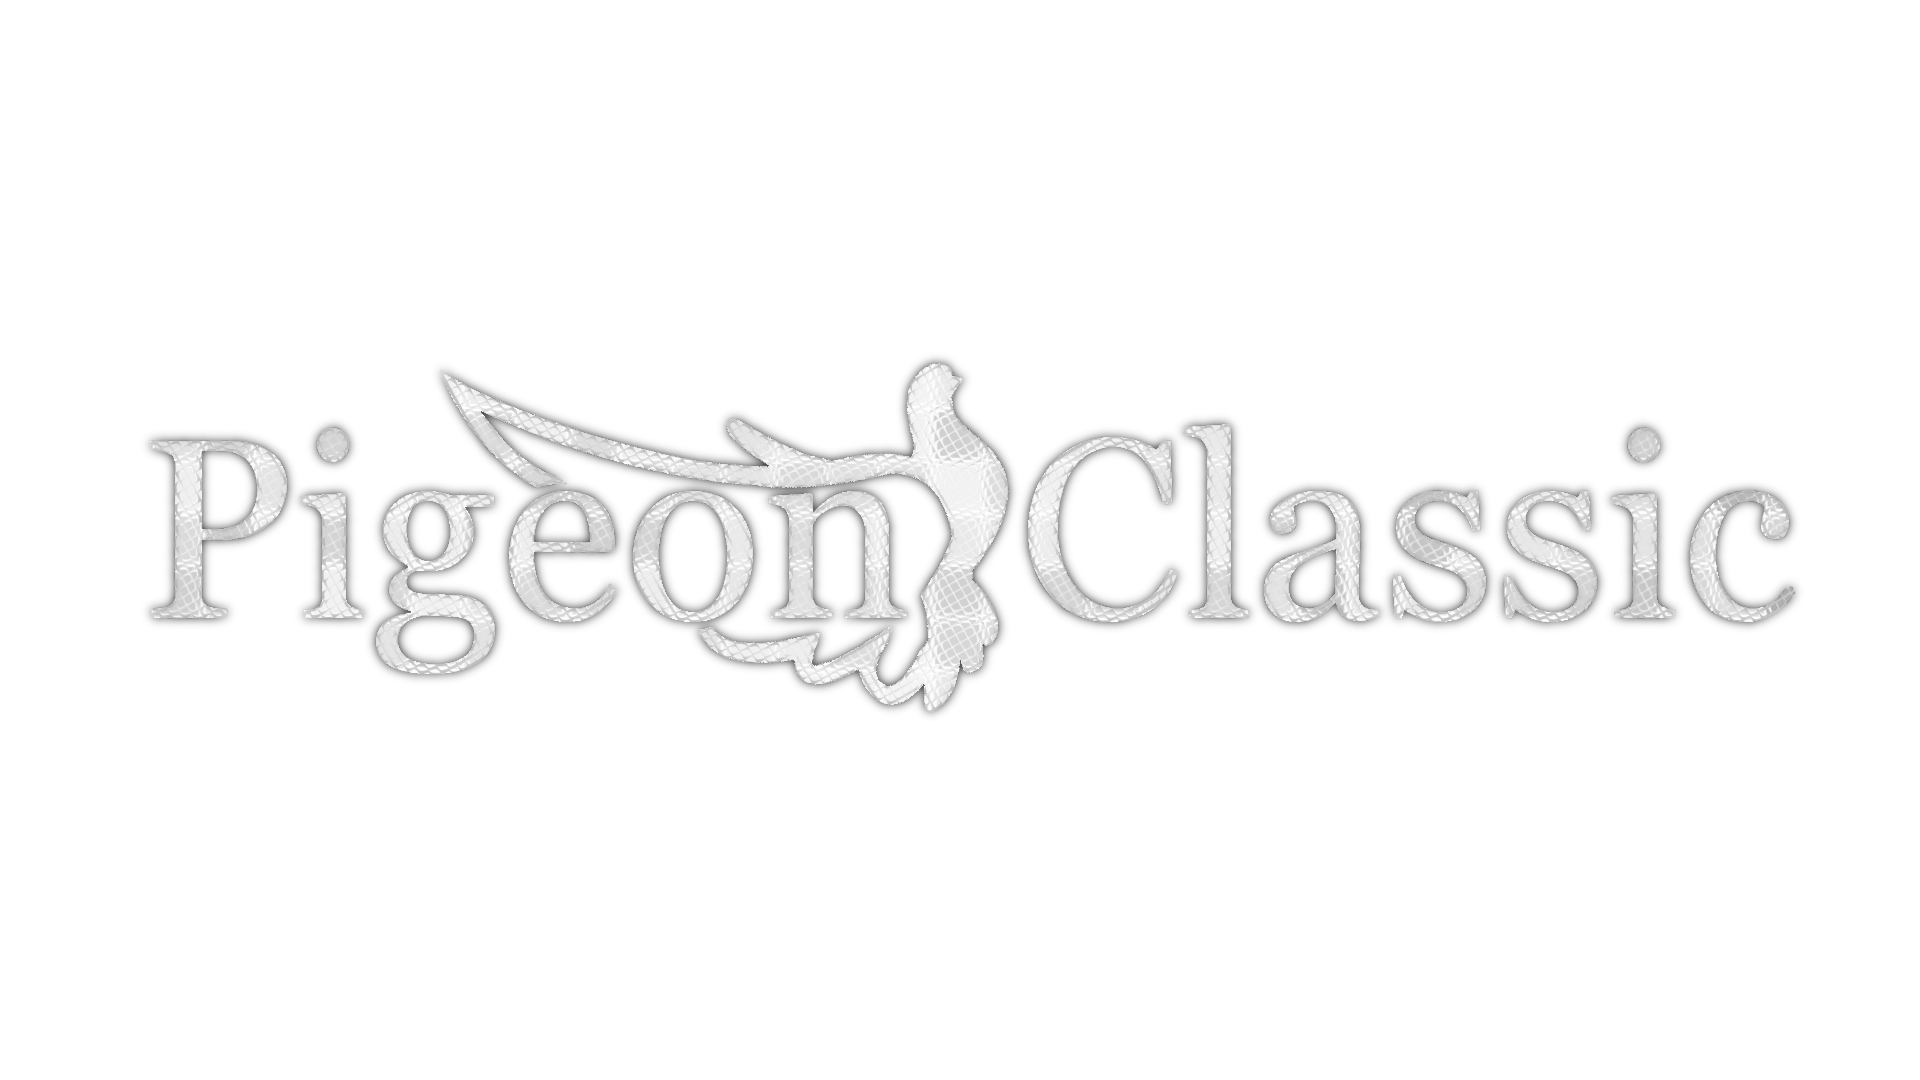 PIGEON CLASSIC FPS CHARITY EVENT: DOOM EVENTS + TEASERS